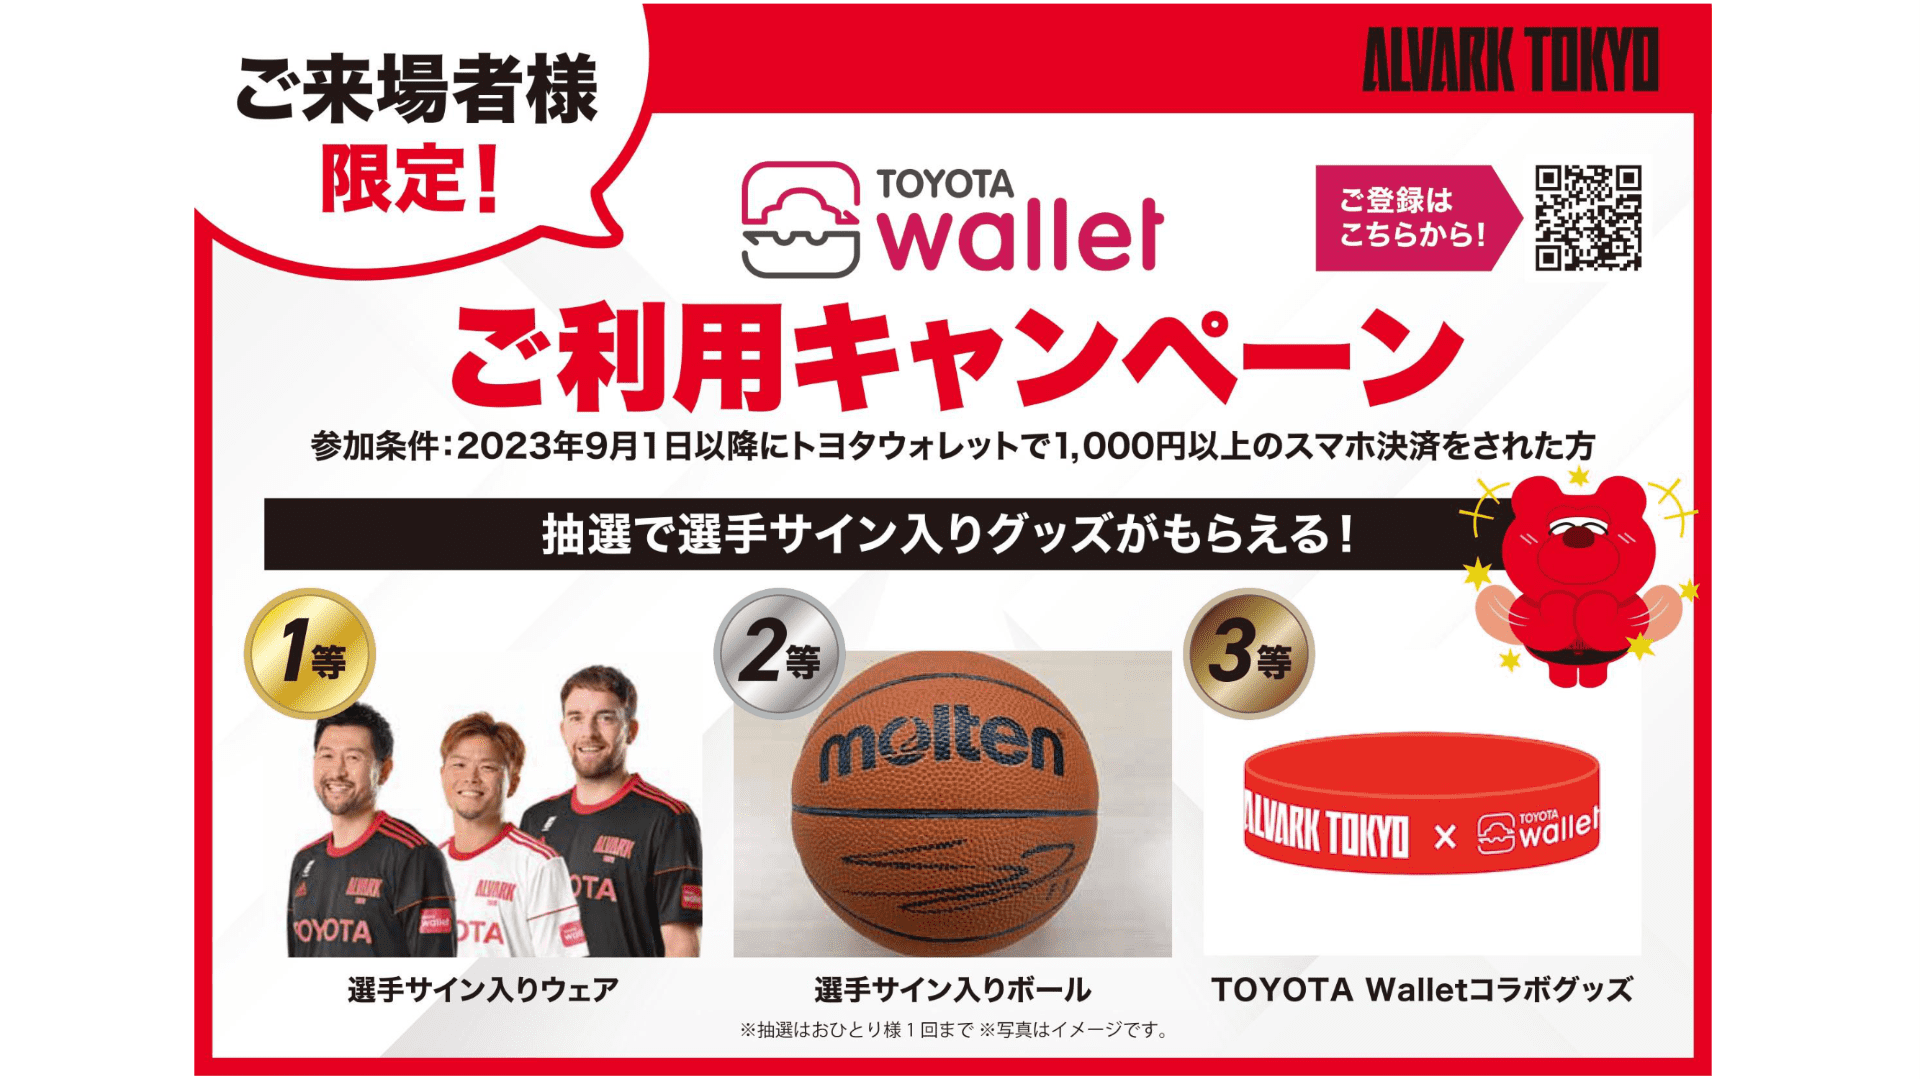 TOYOTA Wallet　抽選会ブース